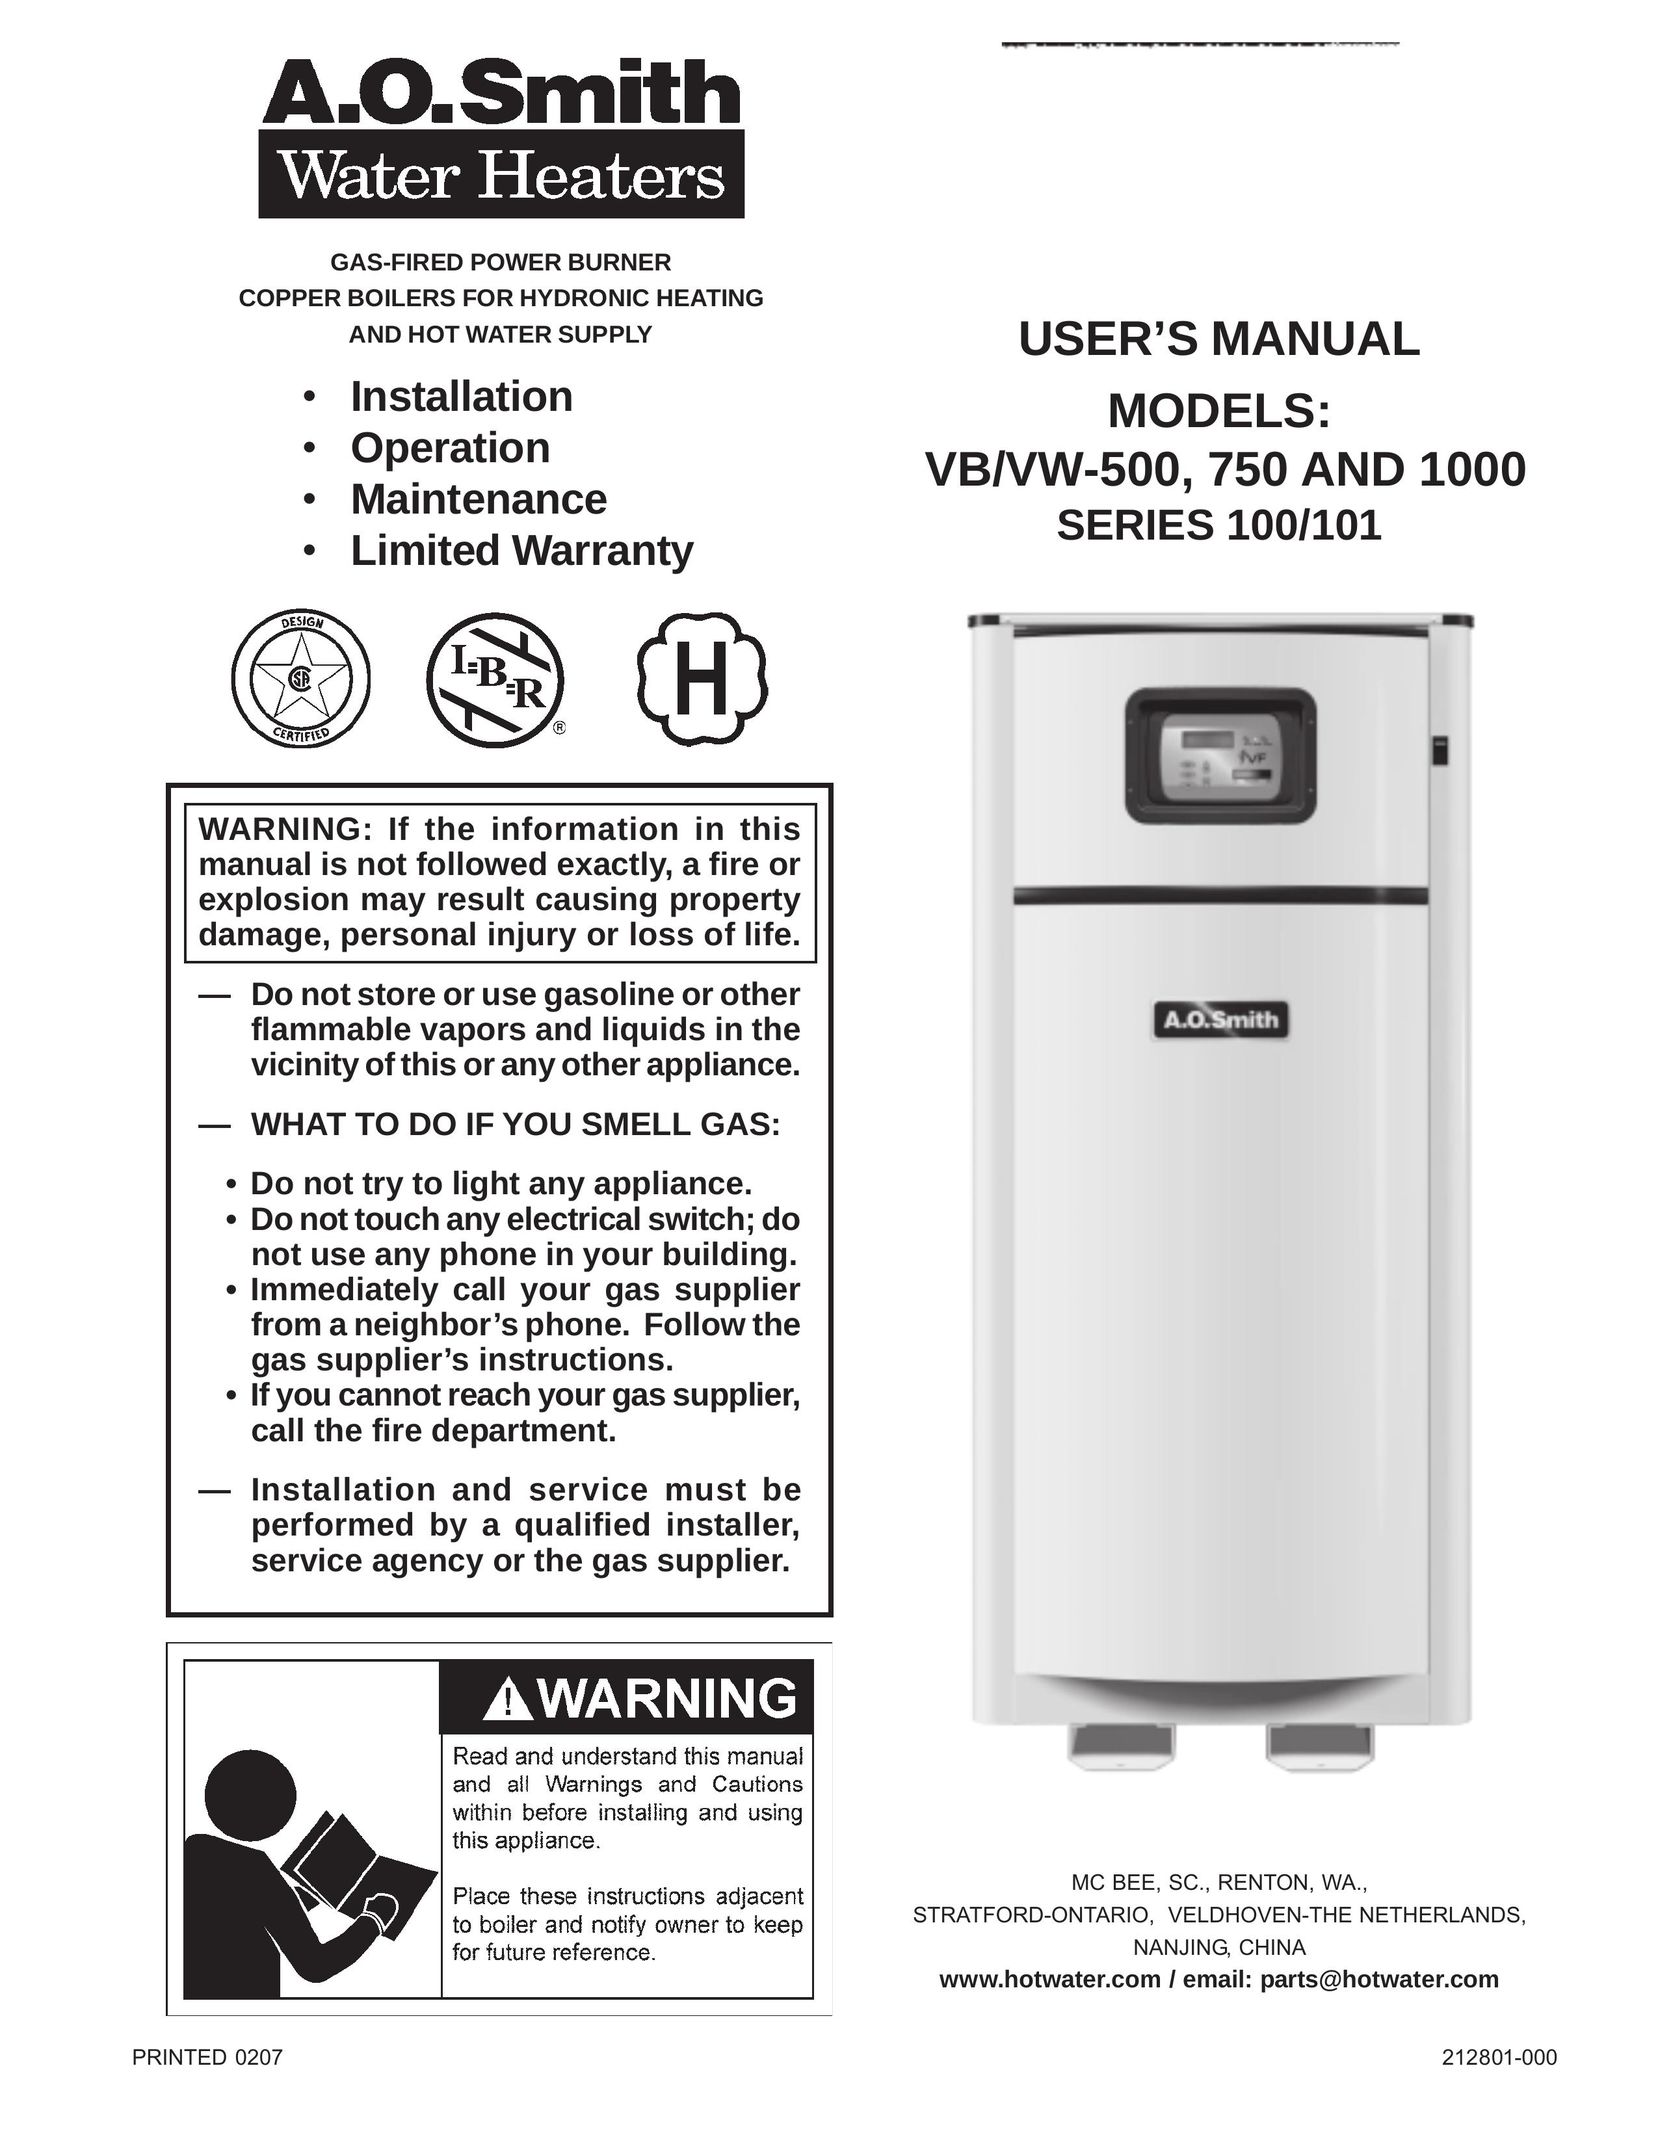 A.O. Smith 1000 SERIES 100 Water Heater User Manual